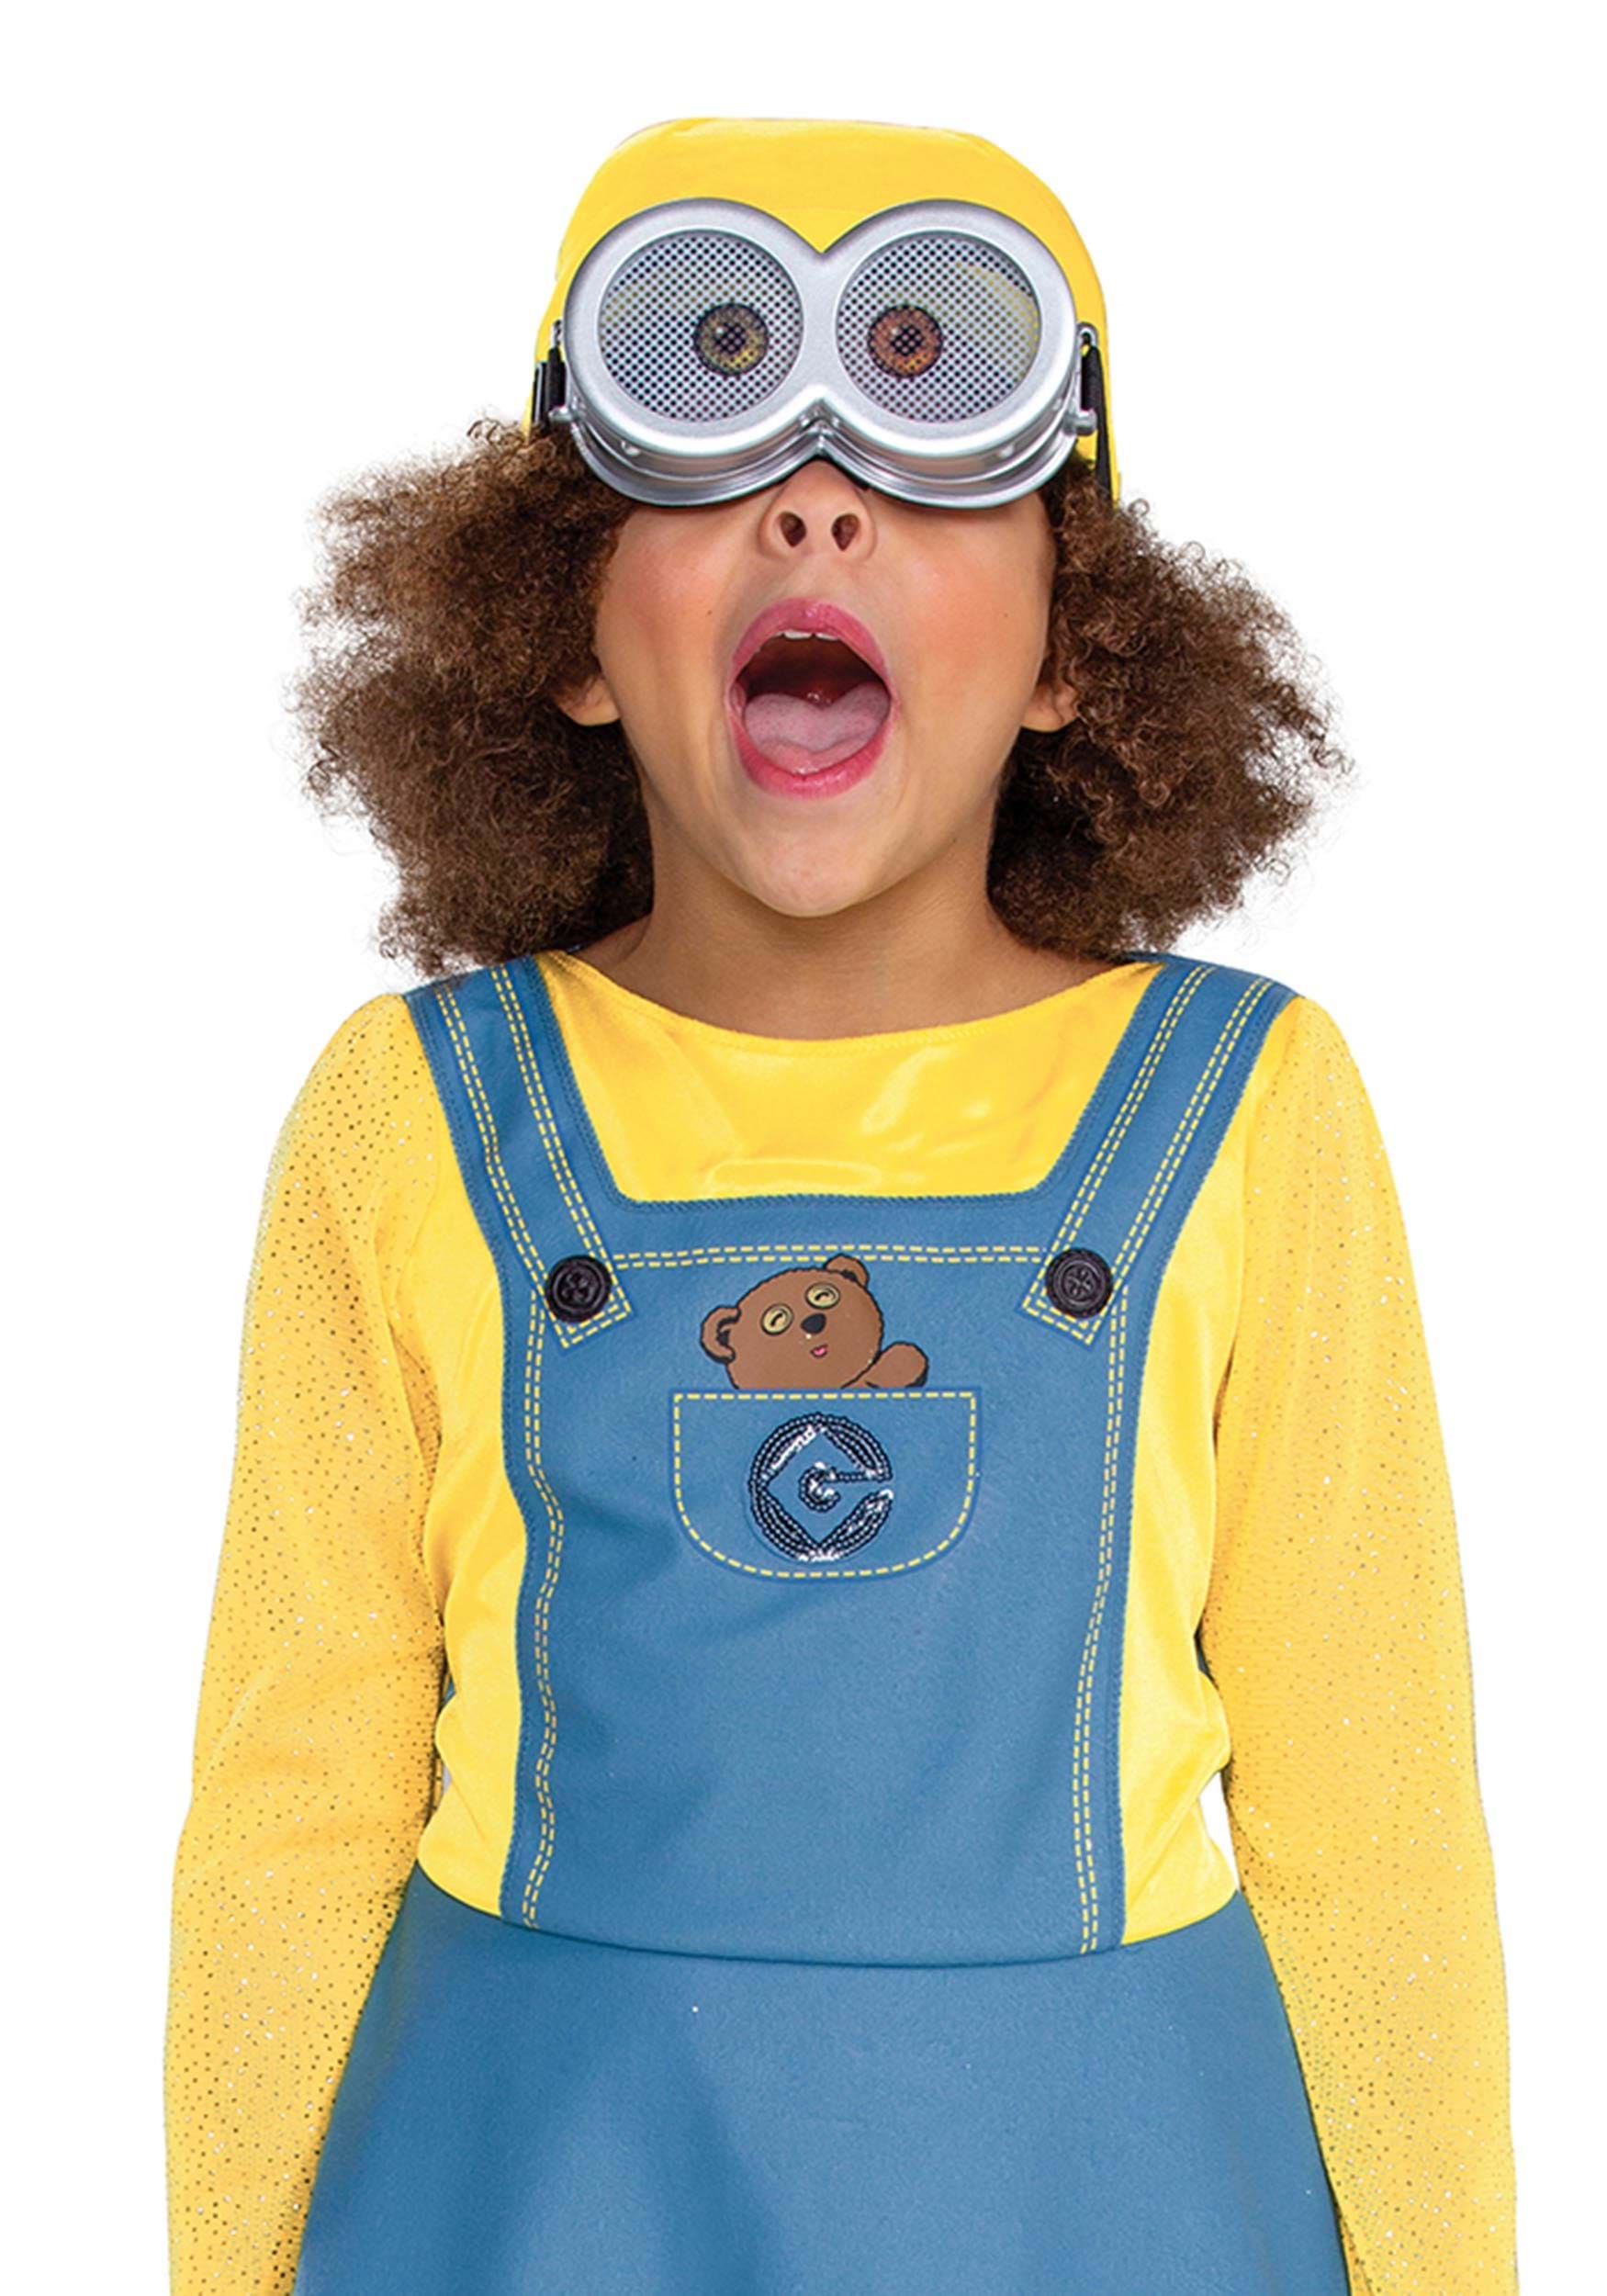 homemade minion costumes for kids